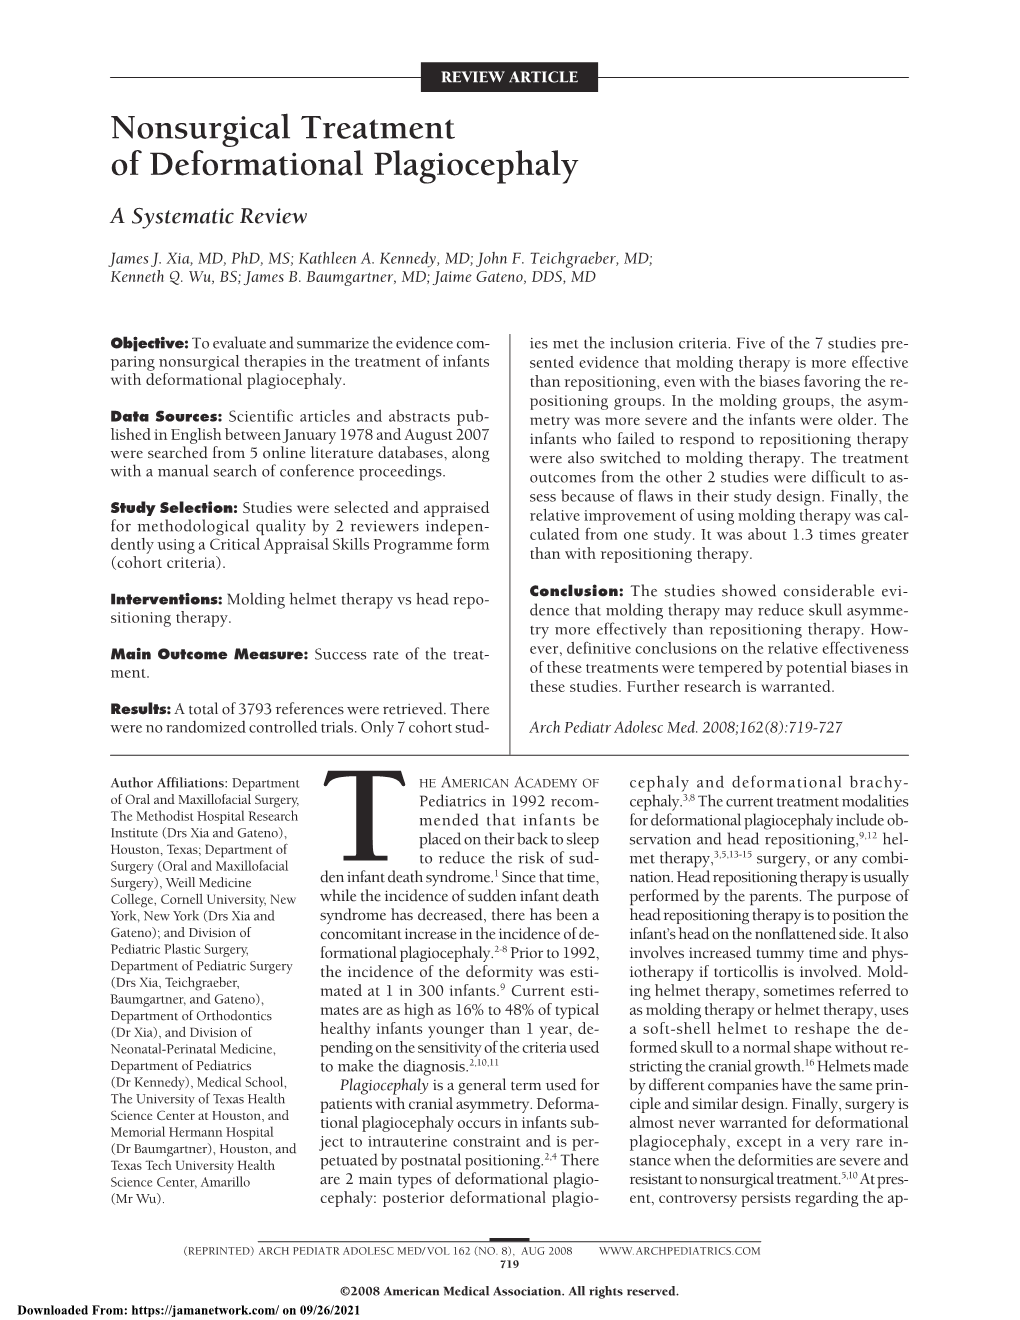 Nonsurgical Treatment of Deformational Plagiocephaly a Systematic Review